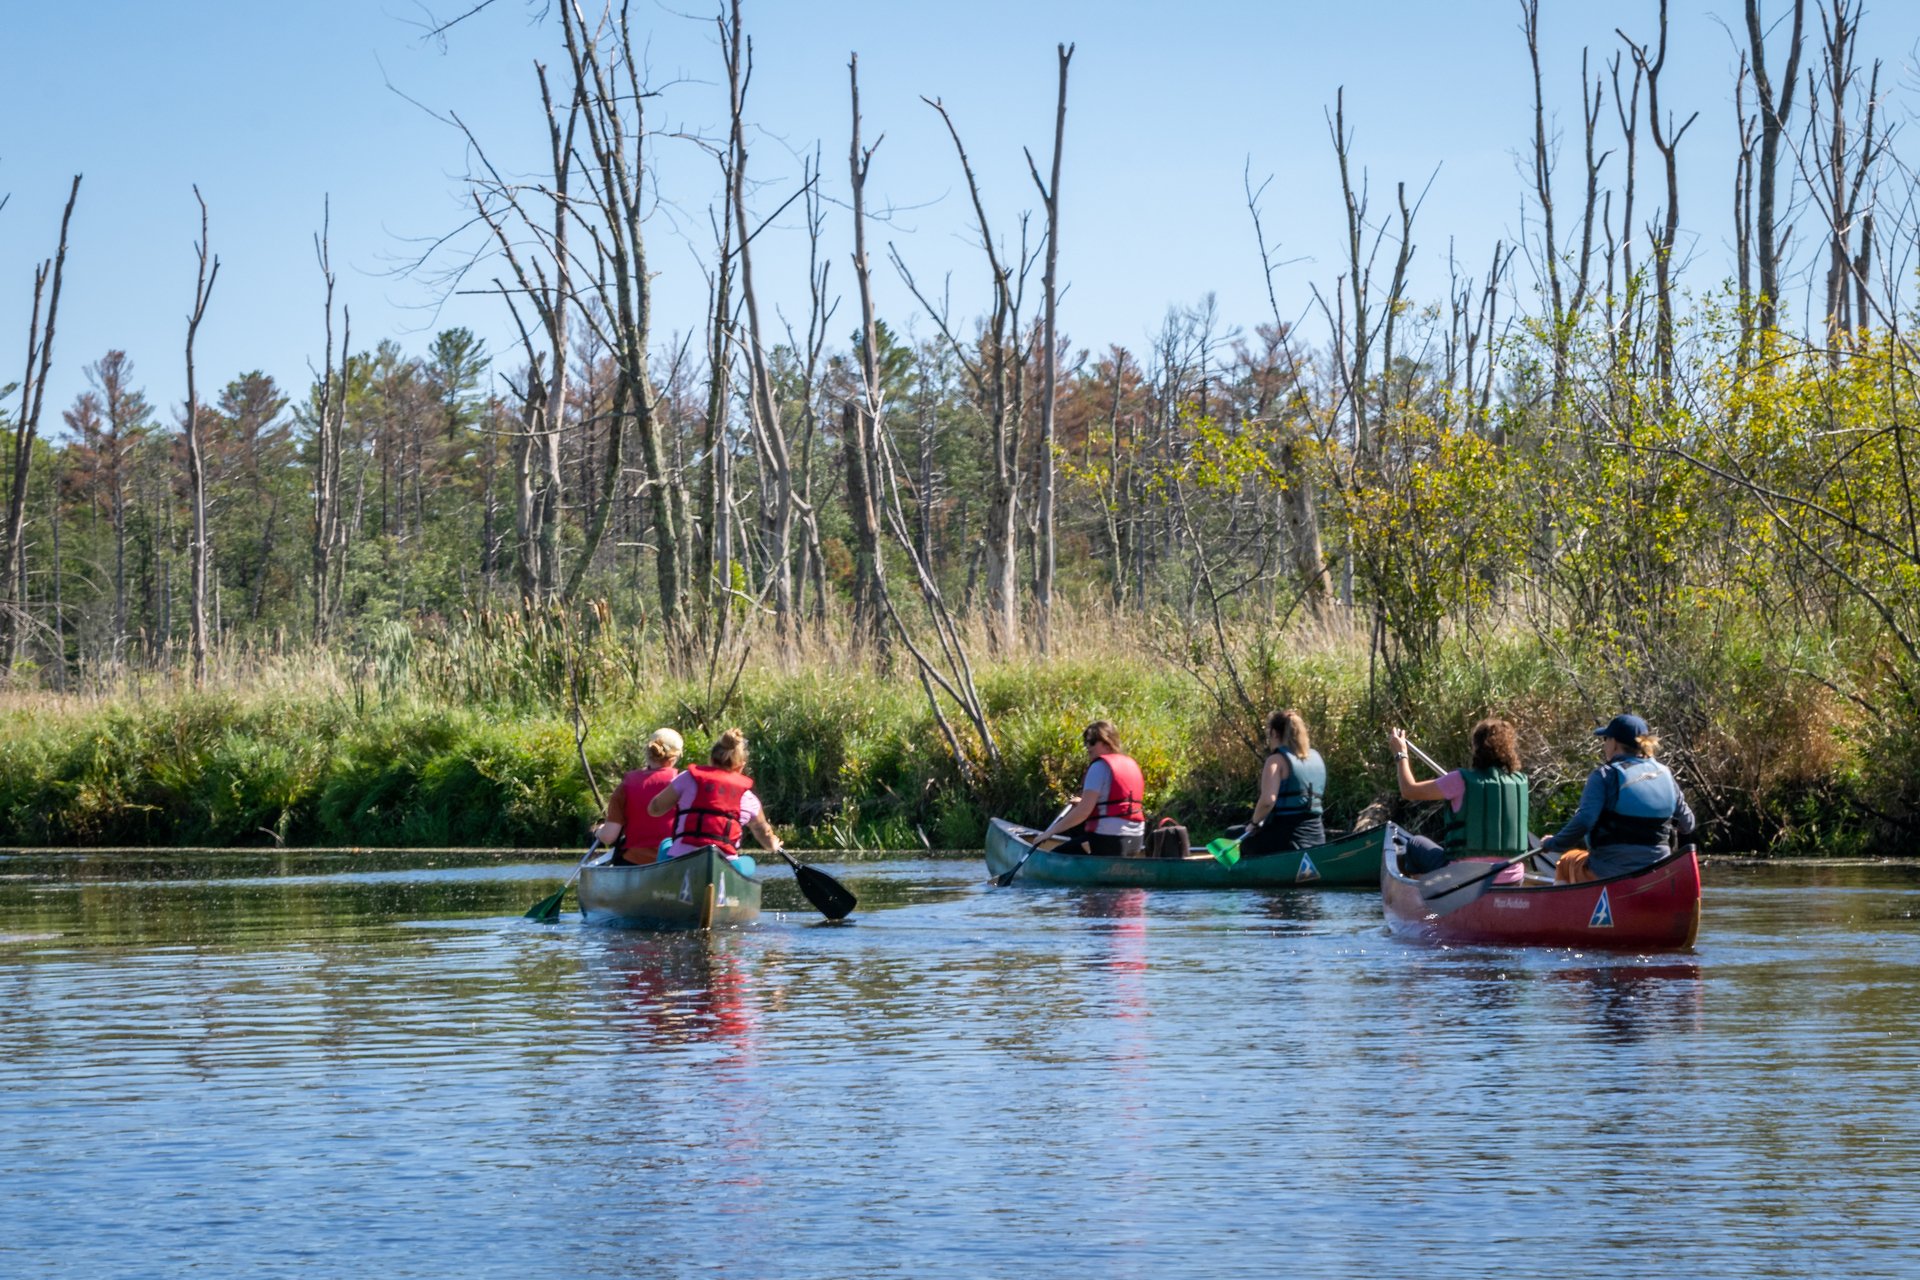 Three canoes with two people in each paddling down a river. Dead trees and green vegetation on the banks are in front of them.